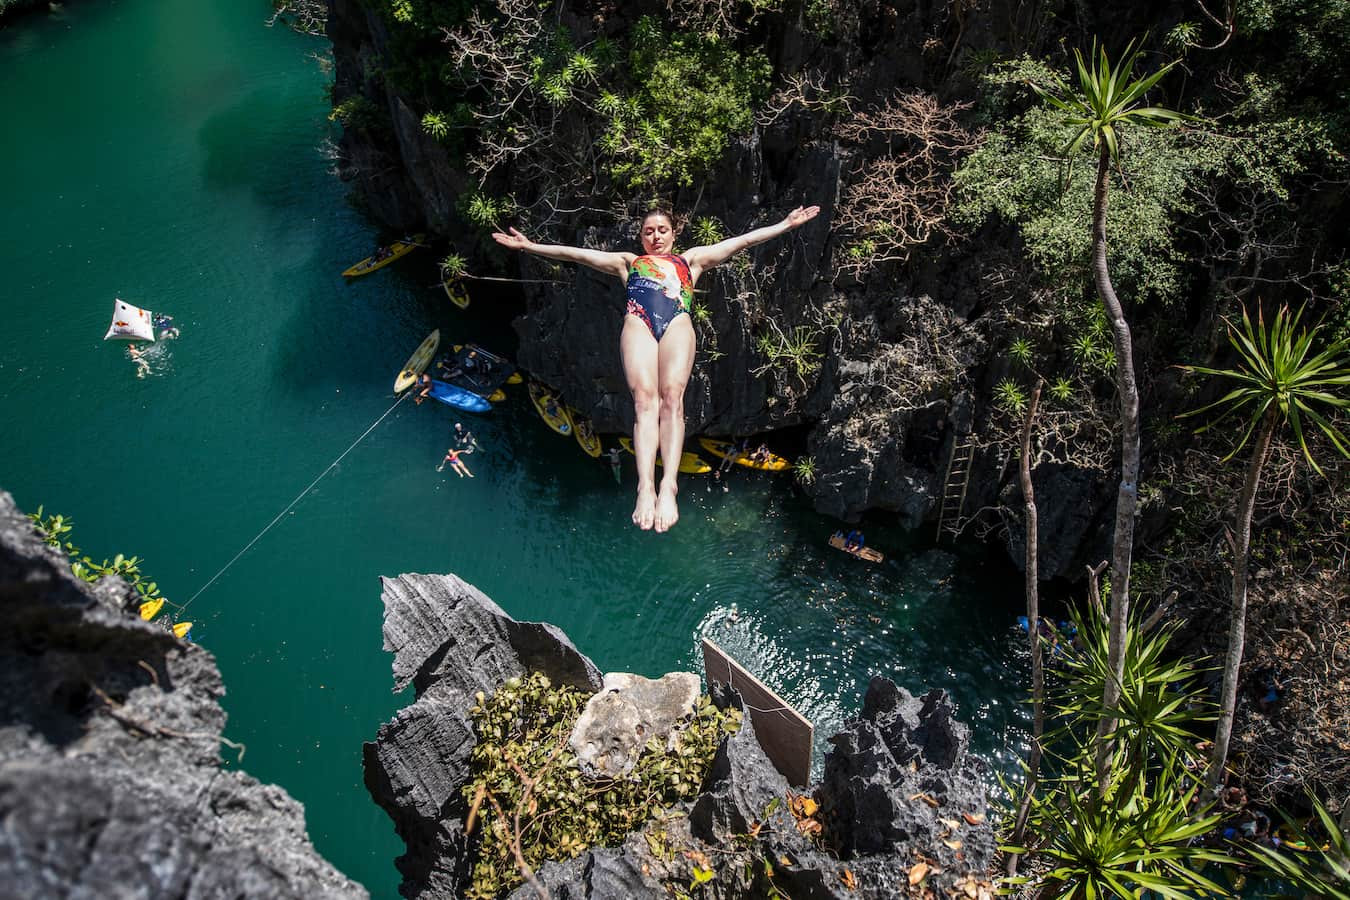 Red Bull Cliff Diving 2019. 